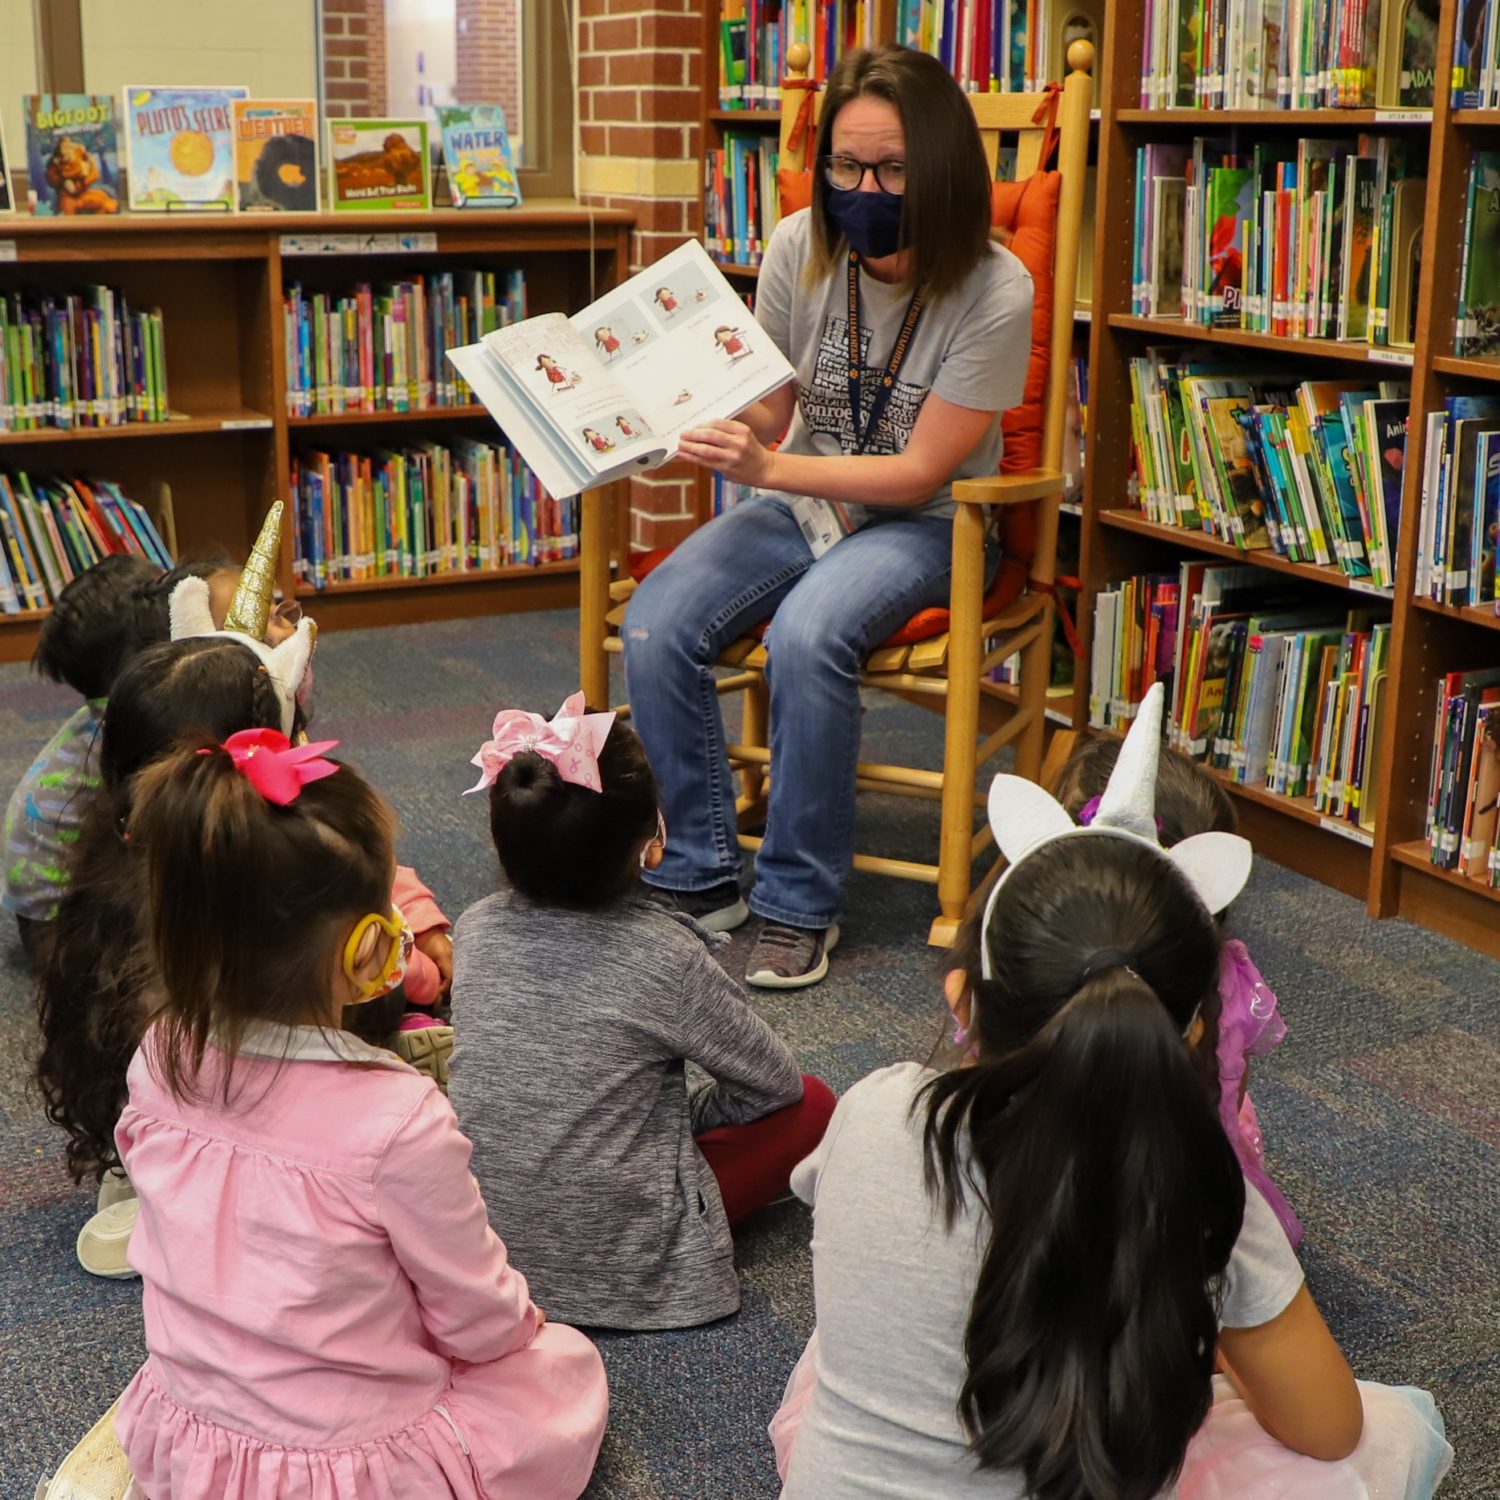 A librarian reads a book to a group of students.